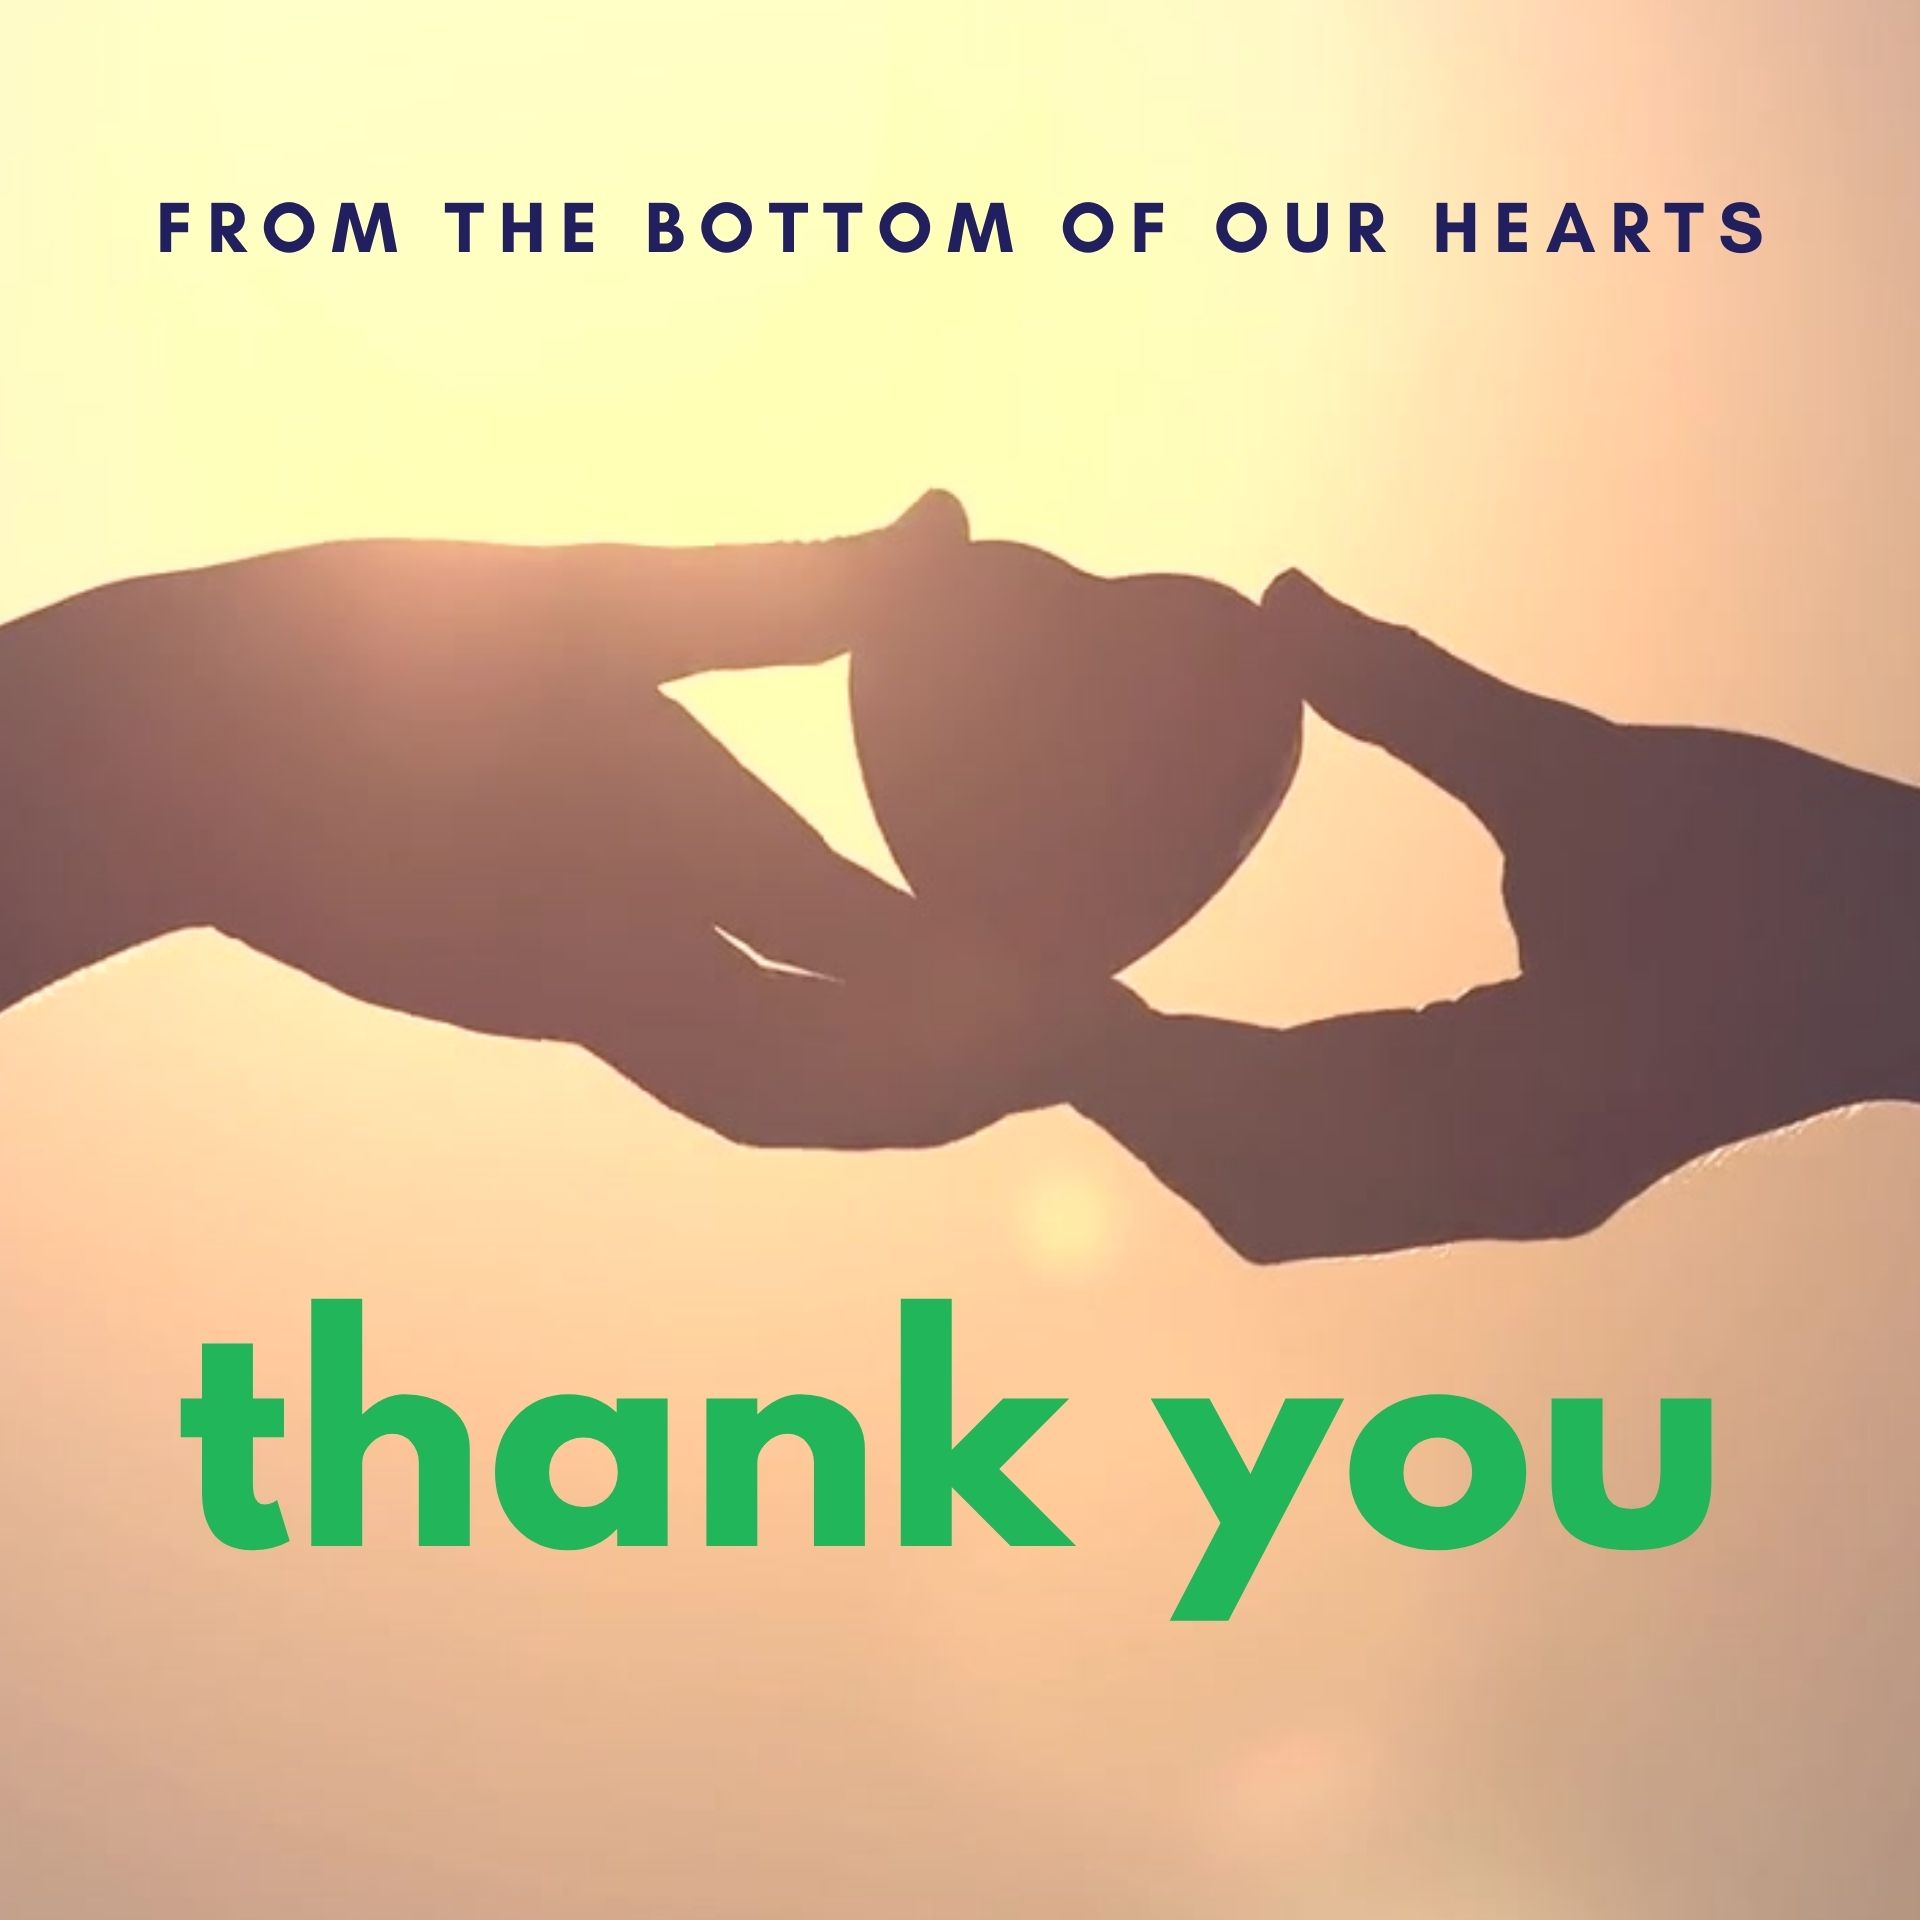 From the bottom of our hearts, thank you.